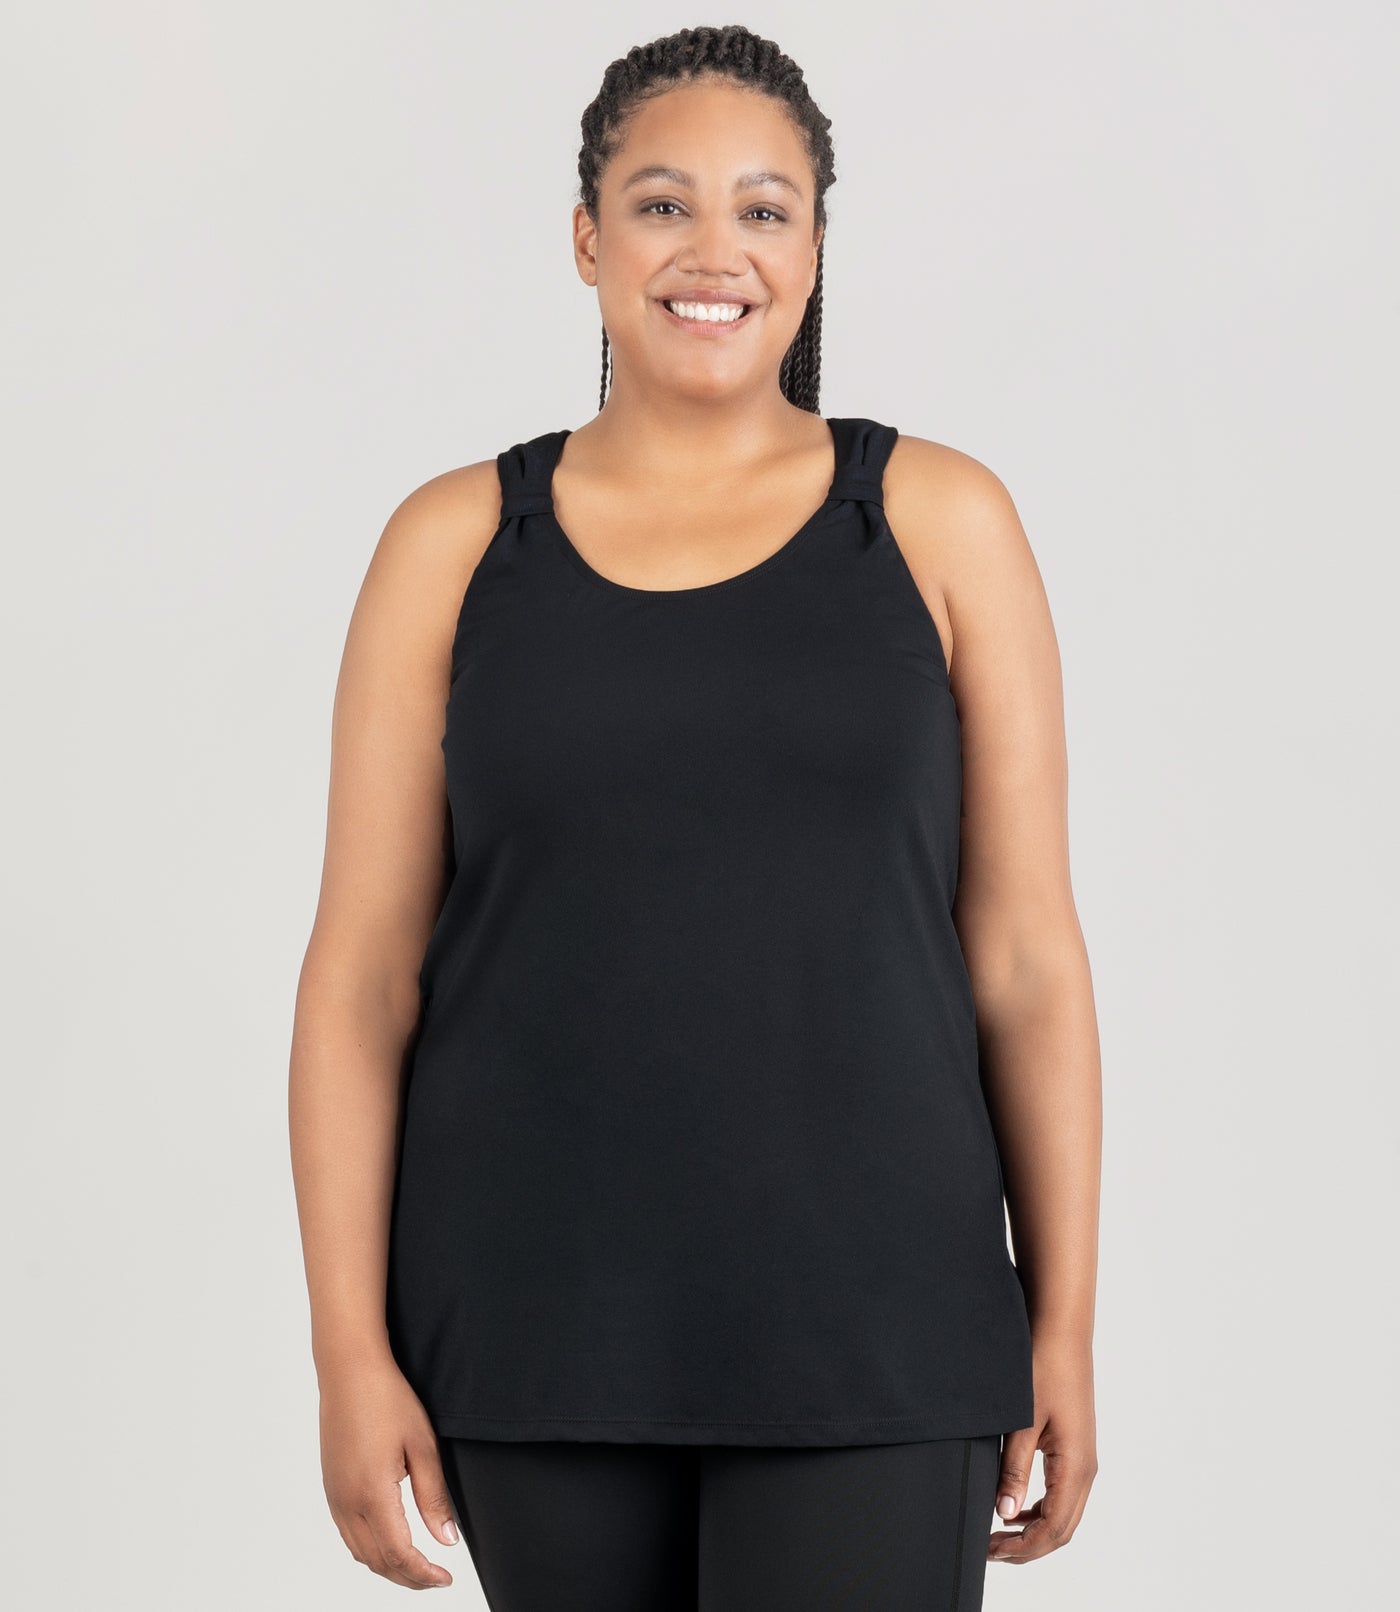 JunoActive model is wearing an Aquasport Hanalei Tankin top in color black. Her arms are by her side.